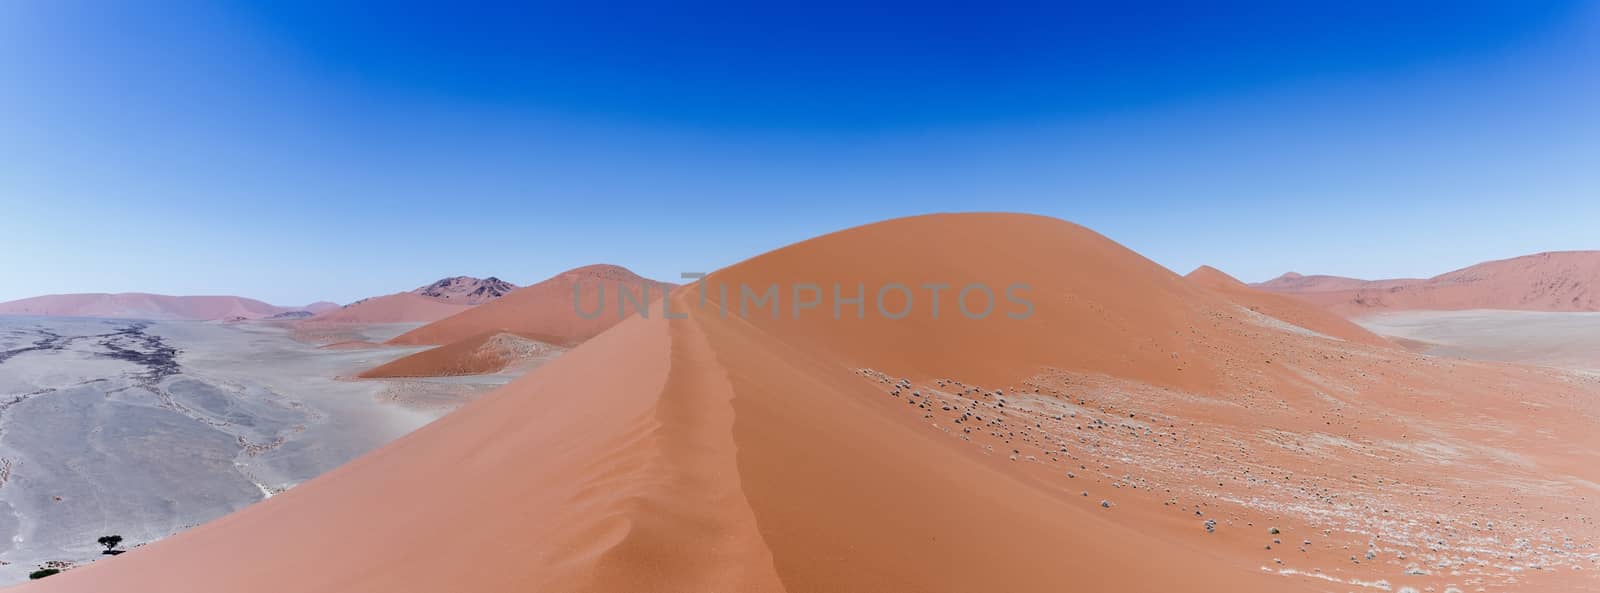 Dune 45 in sossusvlei Namibia, view from the top of a Dune 45 in by artush